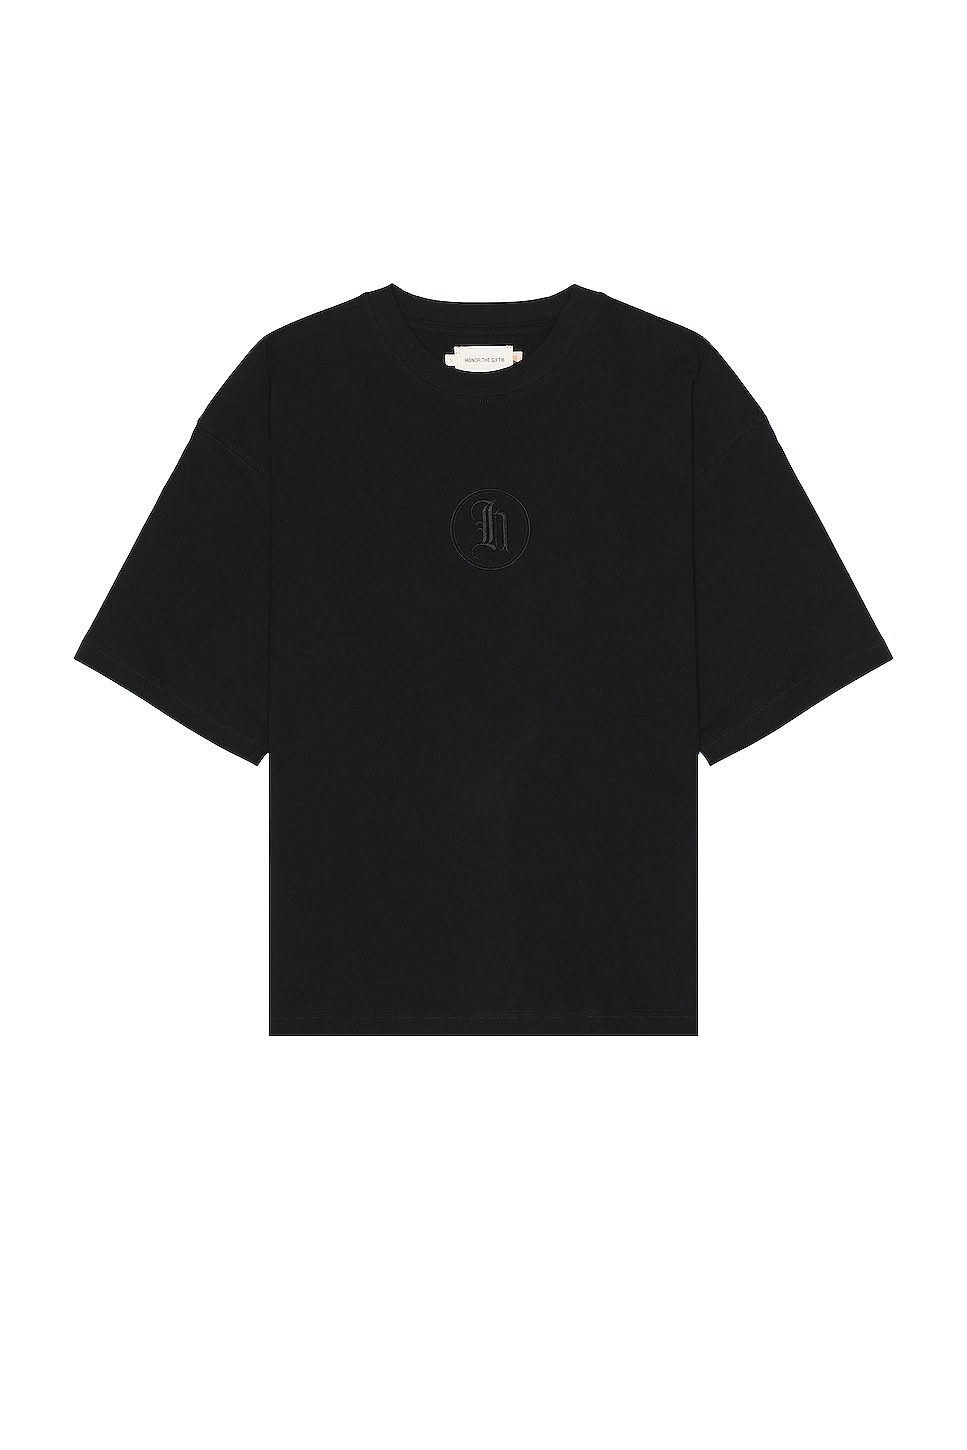 Image 1 of Honor The Gift H Stamp Box Tee in Black